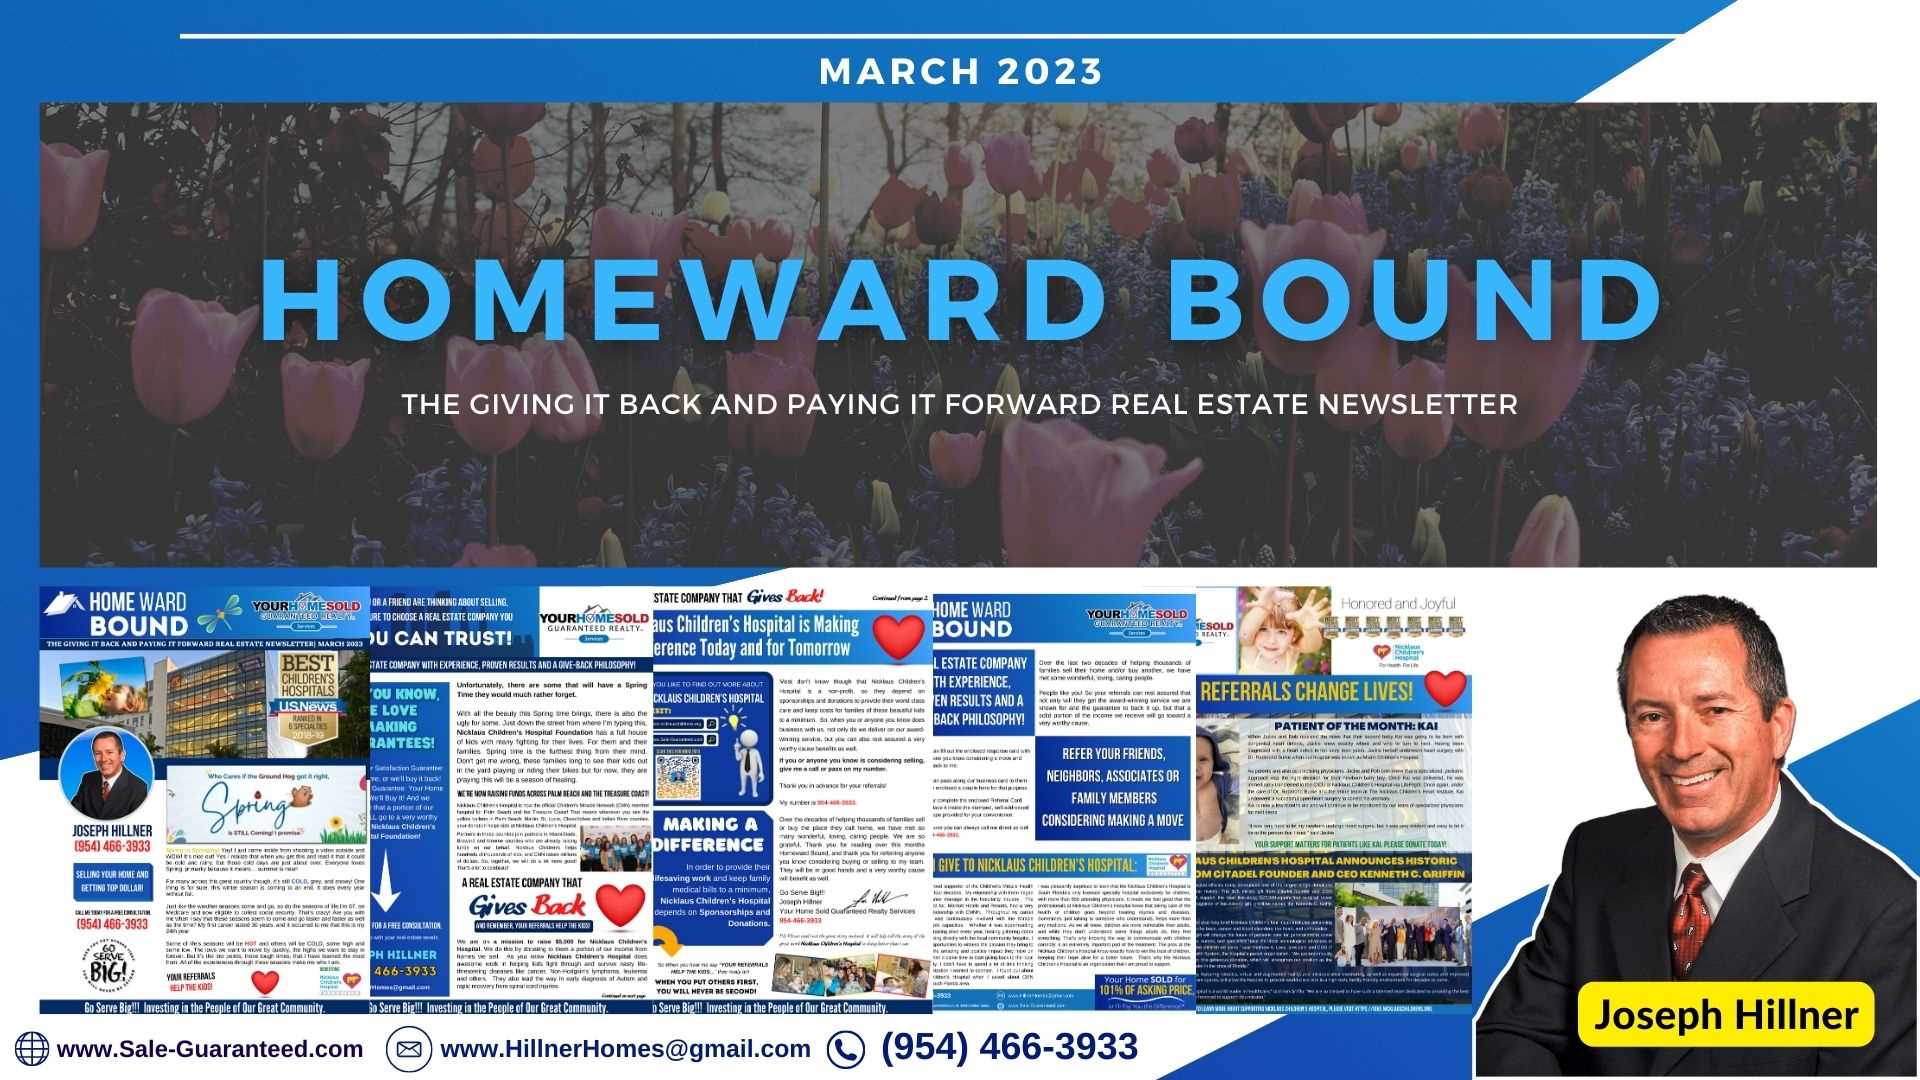 Spring is STILL Coming! I promise. | March 2023 Homeward Bound Newsletter